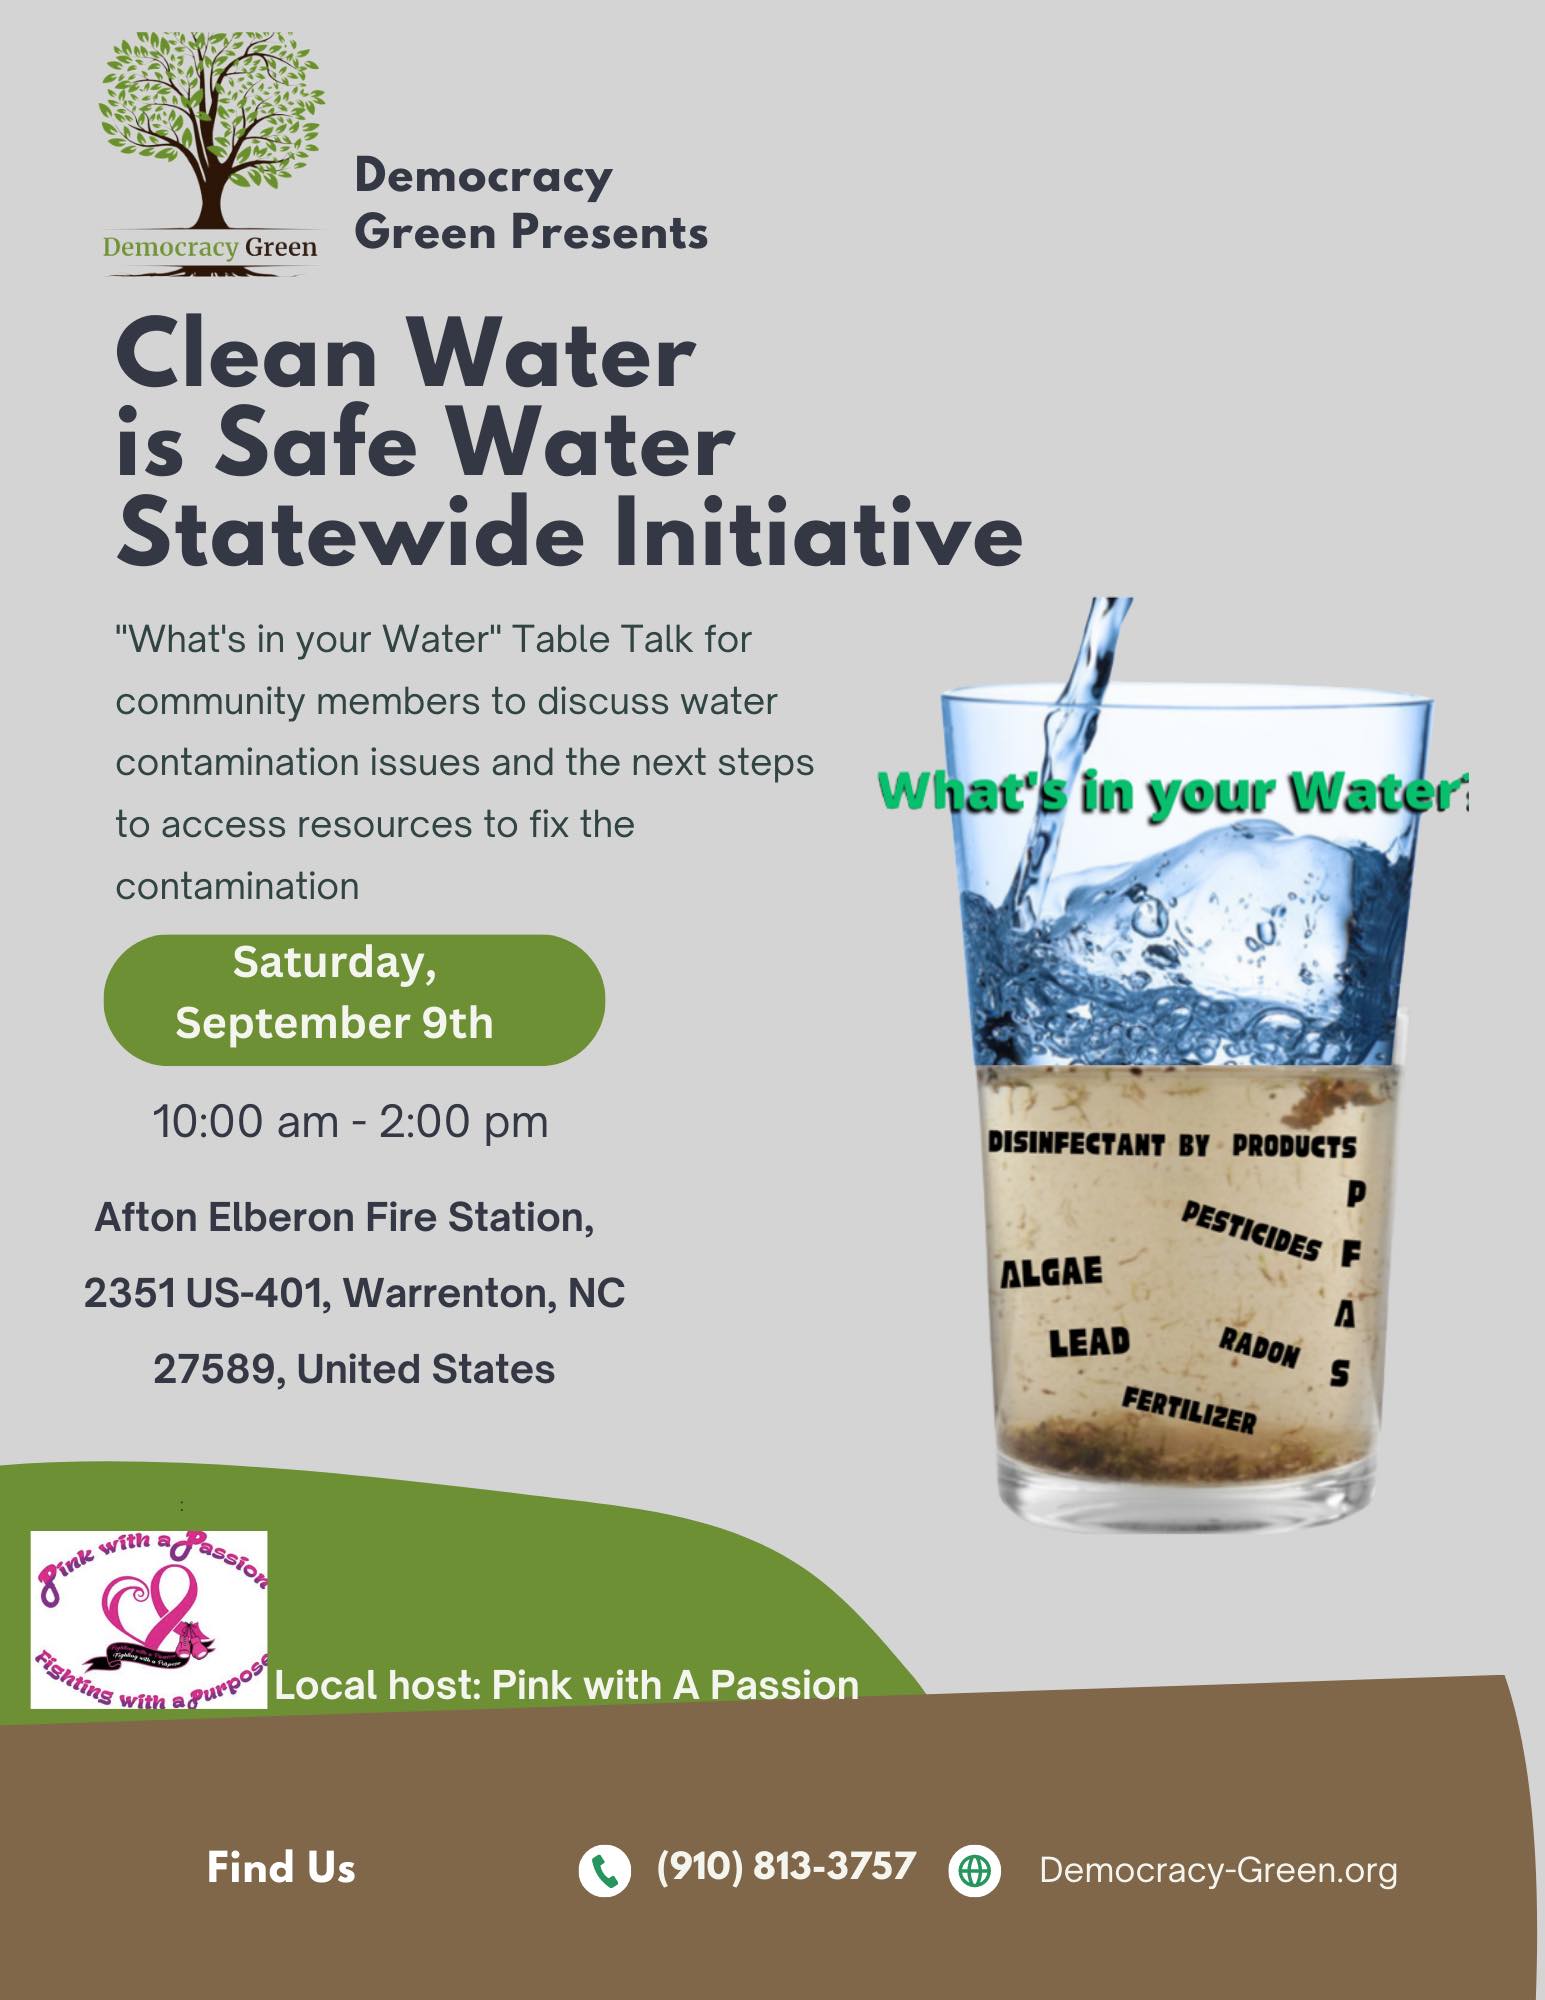 whats in your water clean water workshop pink with a passion warrenton nc